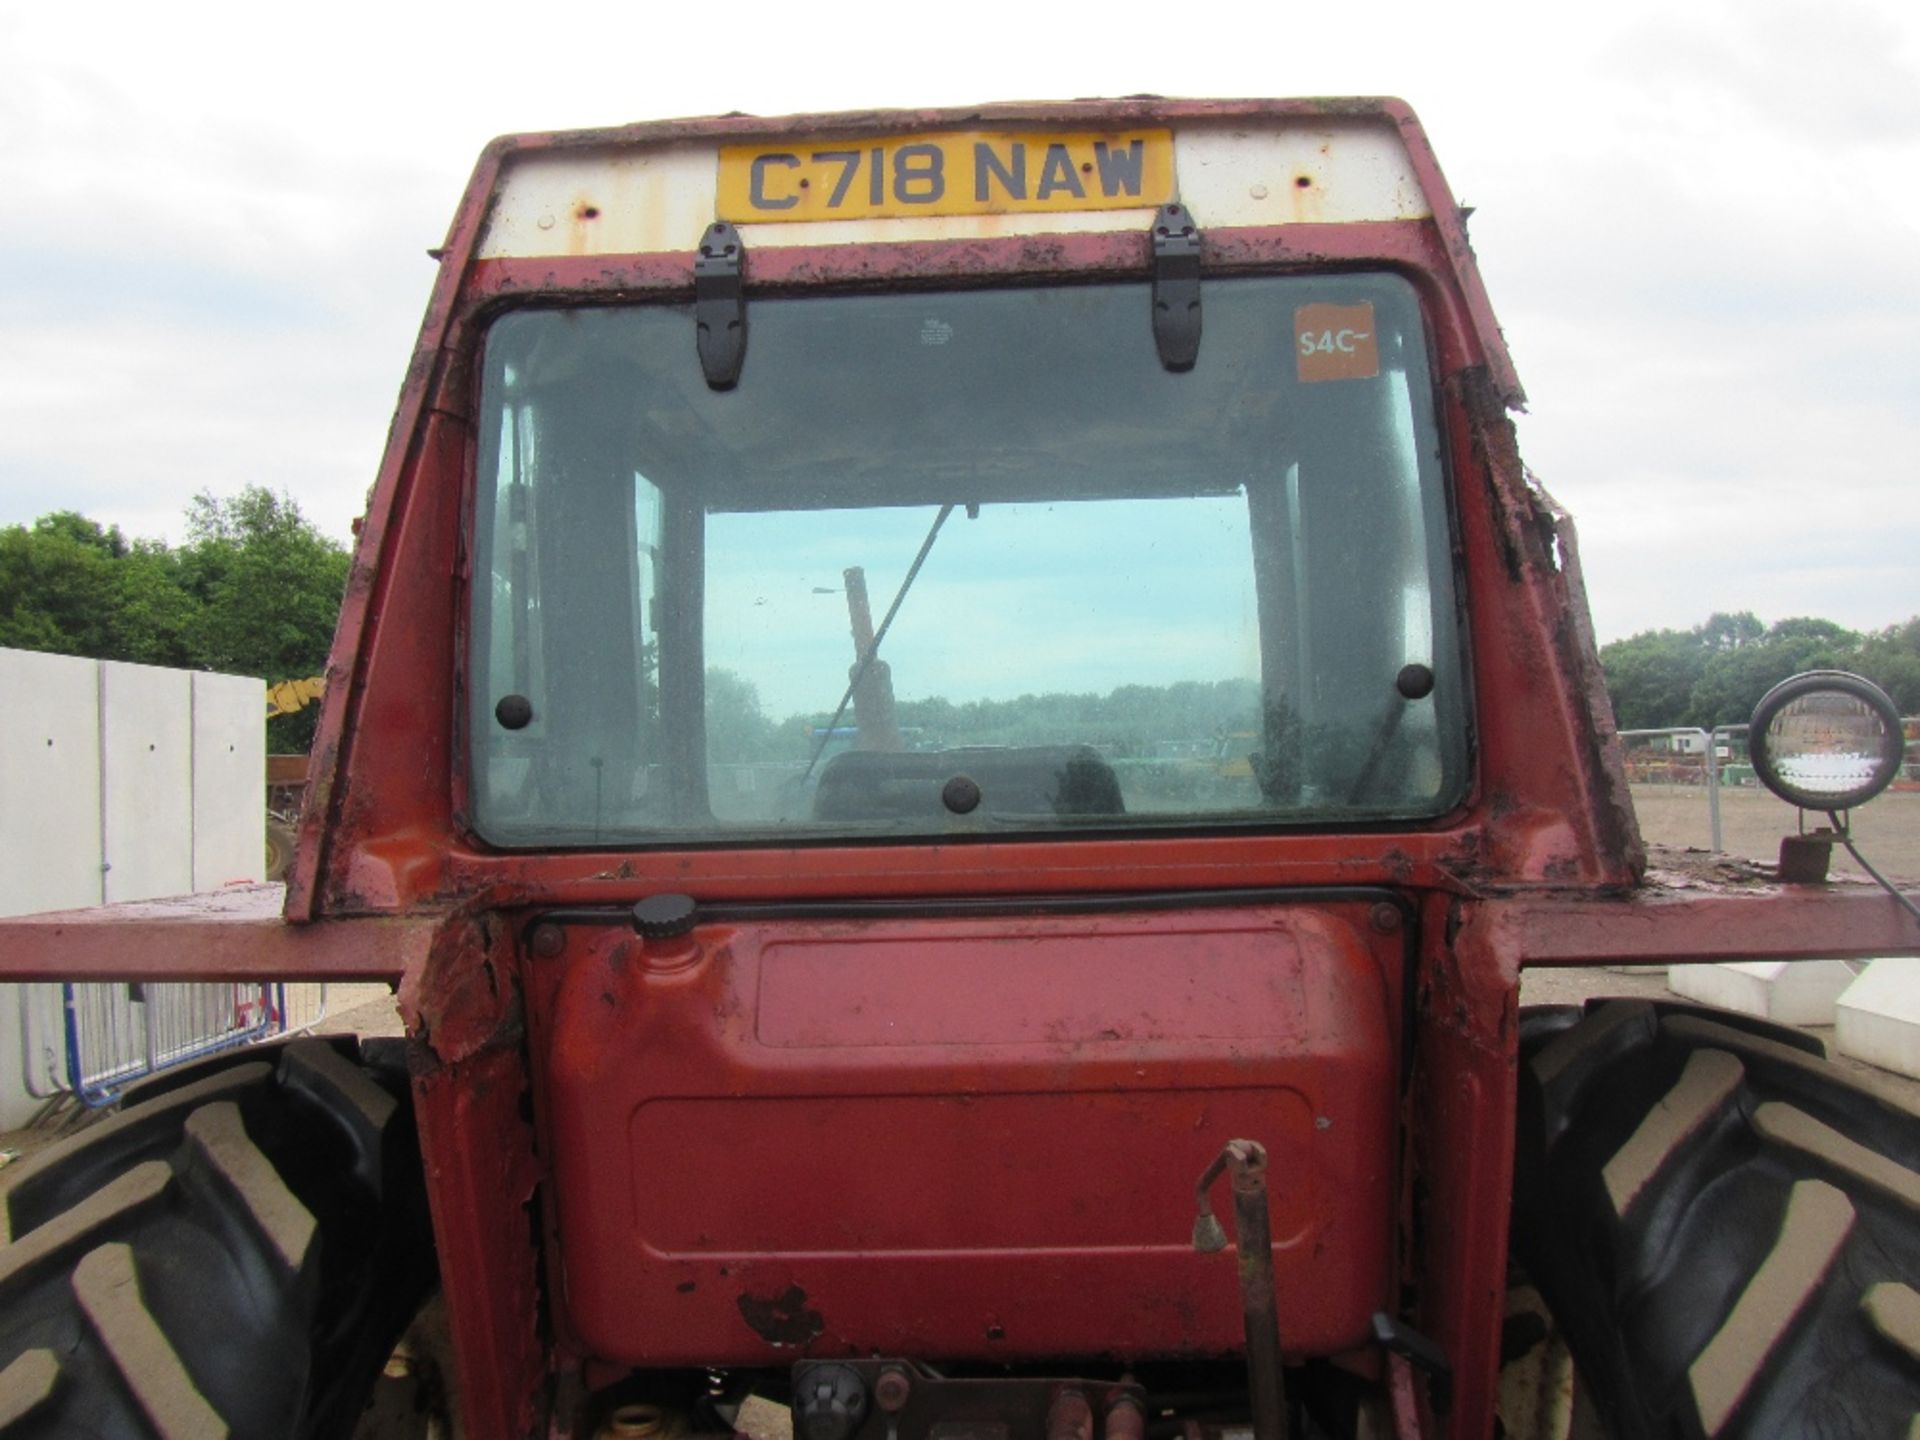 Fiat 80-90 DT 4wd Tractor Reg. No. C718 NAW - Image 8 of 14